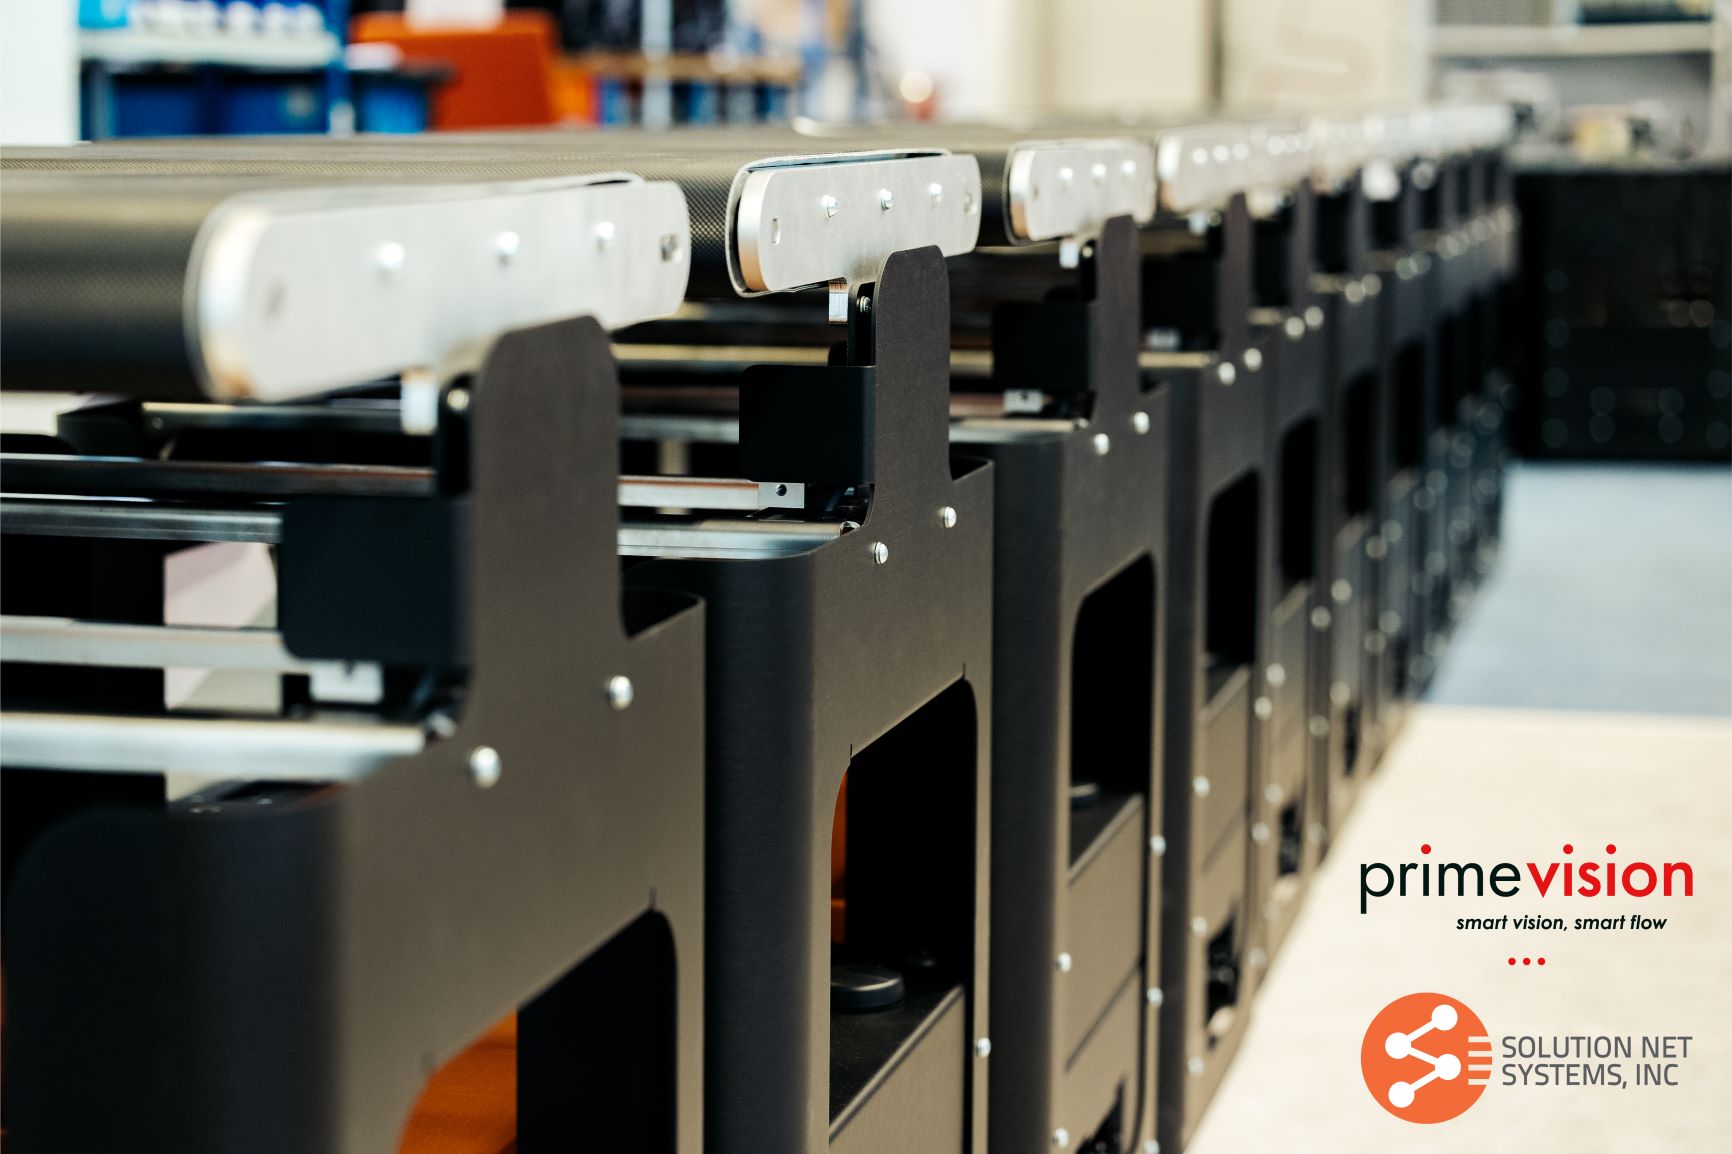 PRIMEVISION AND SNS PARTNERSHIP OFFERS FUTURISTIC ROBOTIC SORTING SOLUTION